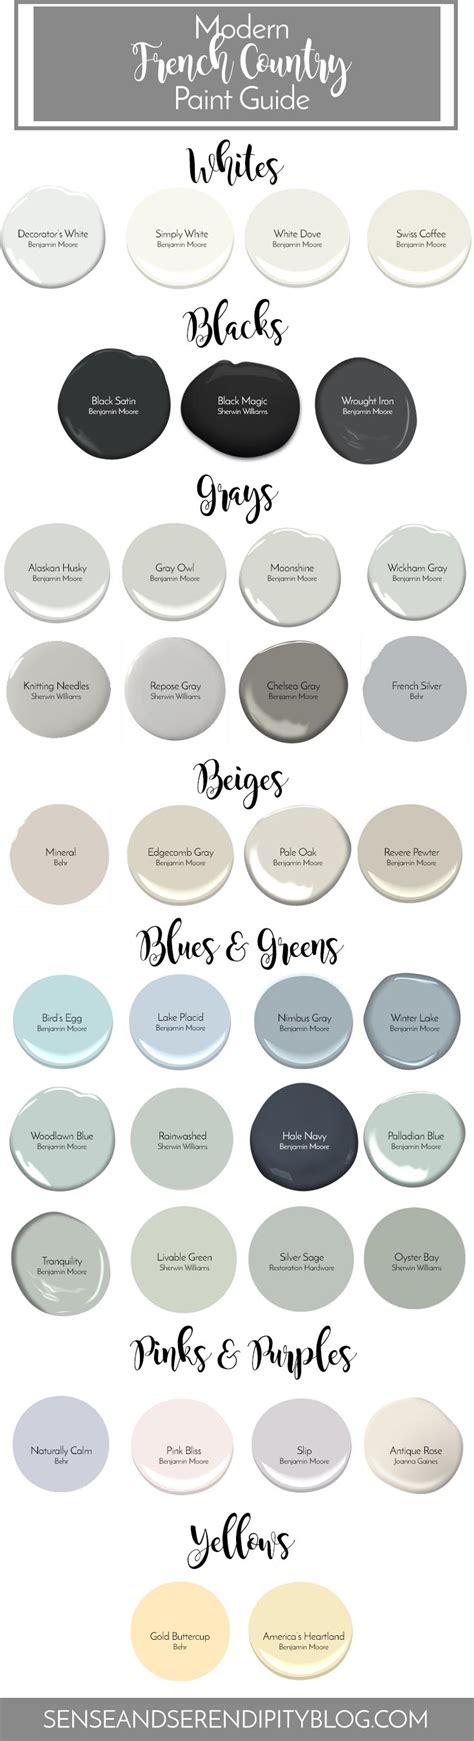 Modern French Country Paint Guide Sense And Serendipity